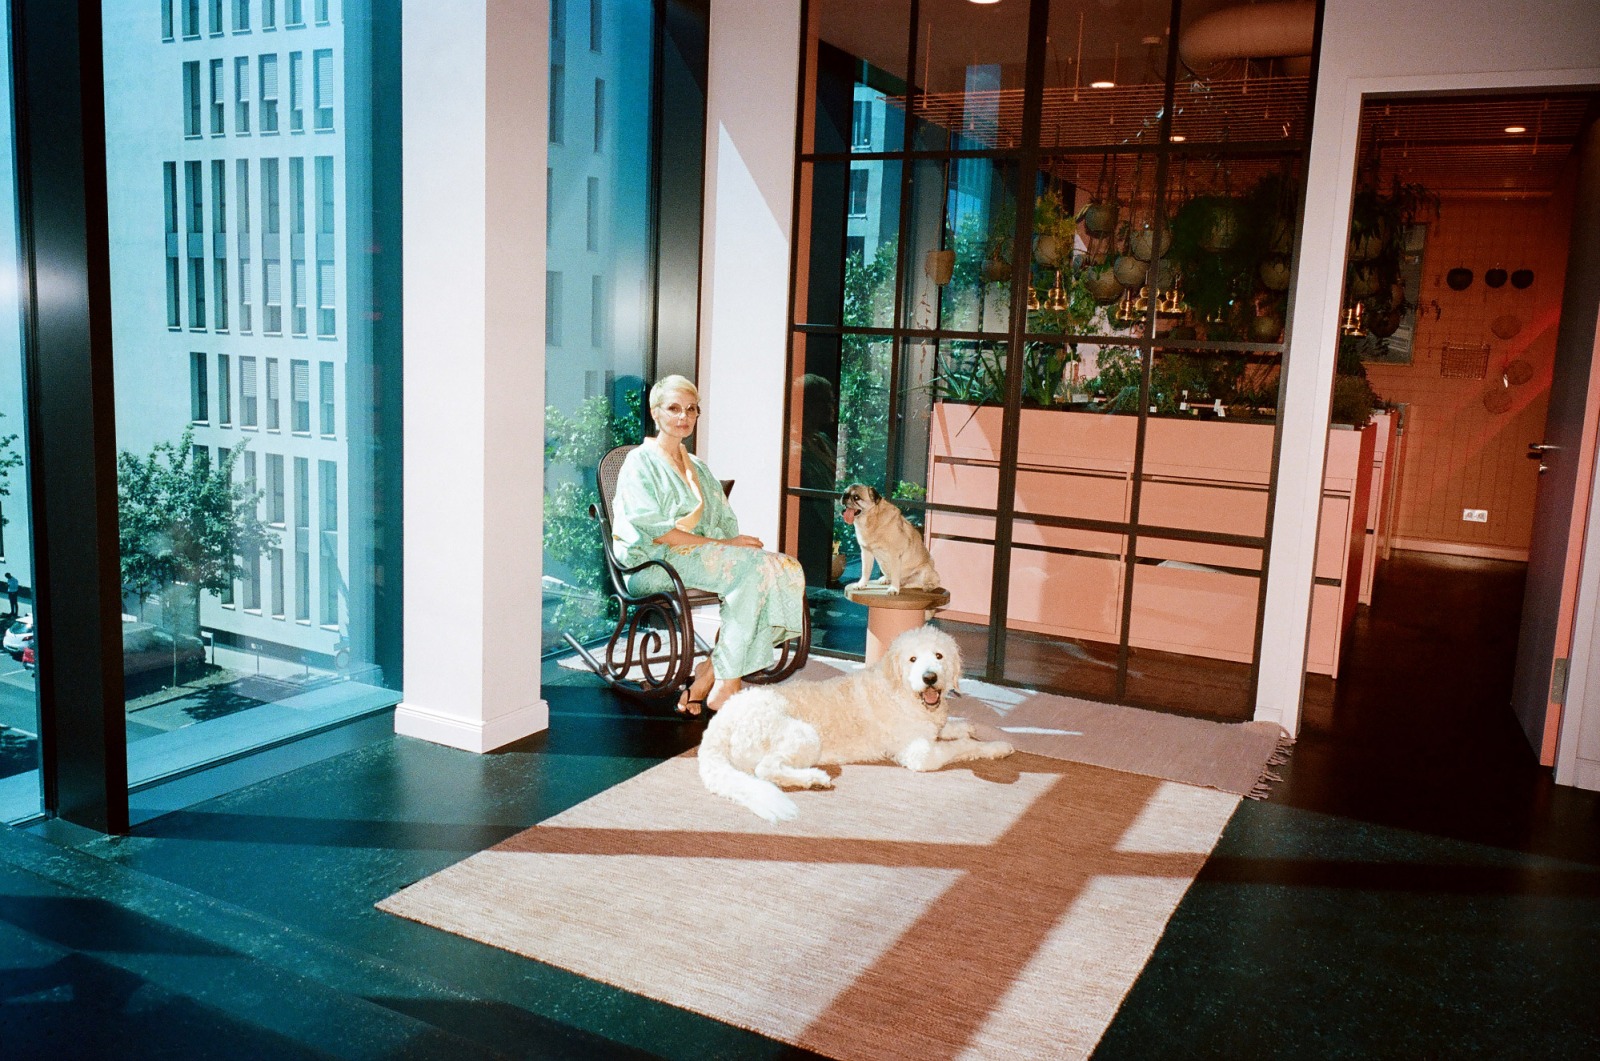 Lindenberg Hotel Dogs and Residients 3 by Marc KRAUSE